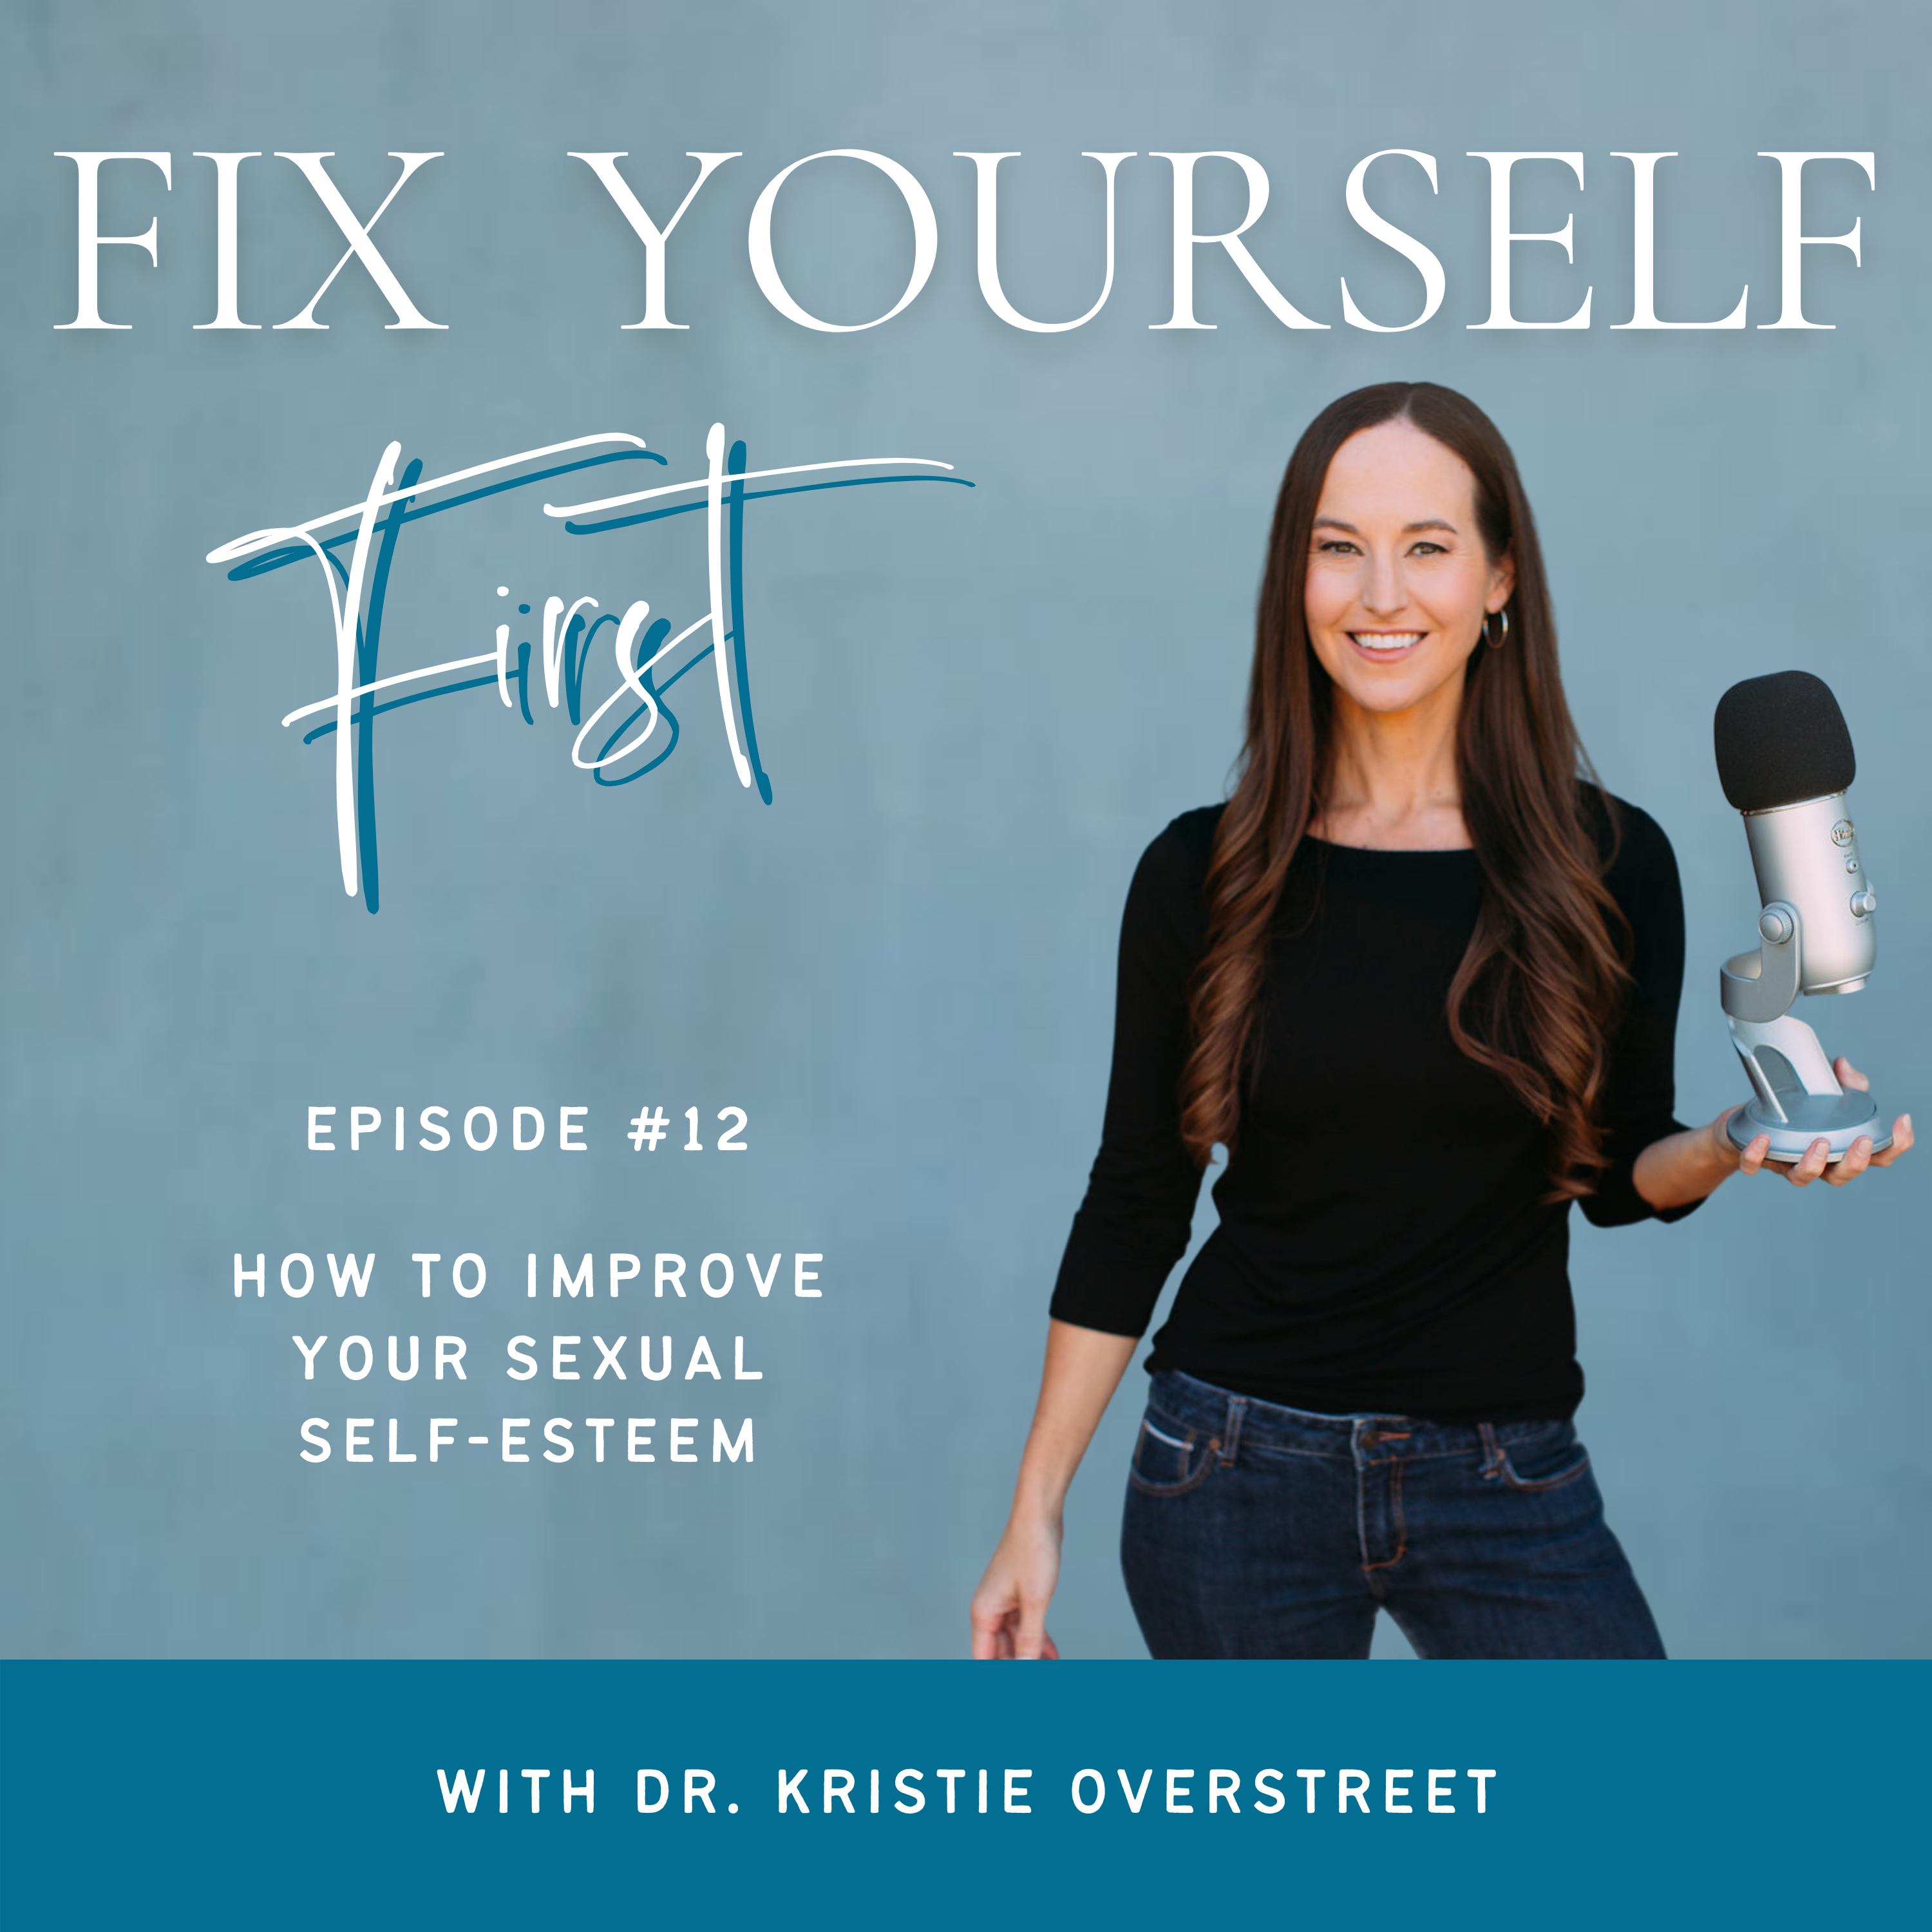 Fix Yourself First - Episode 12